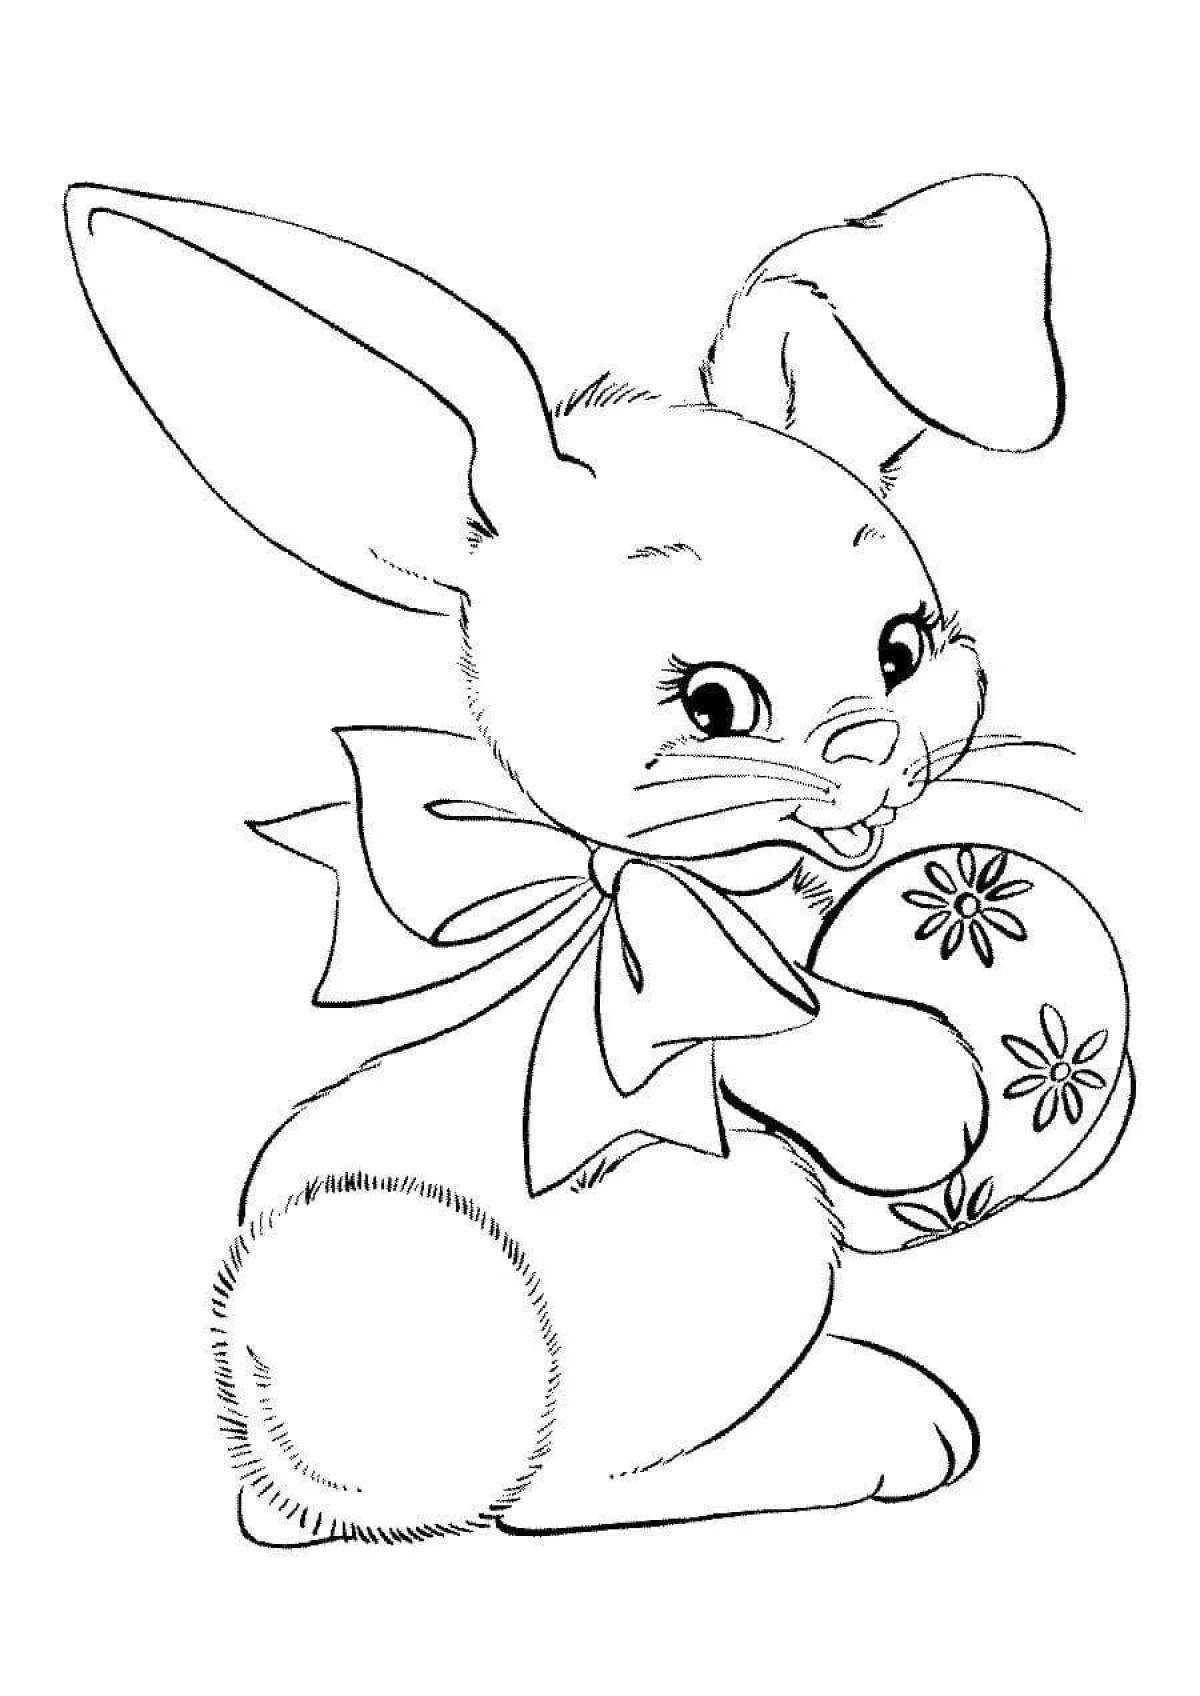 Bunny with a gift #1